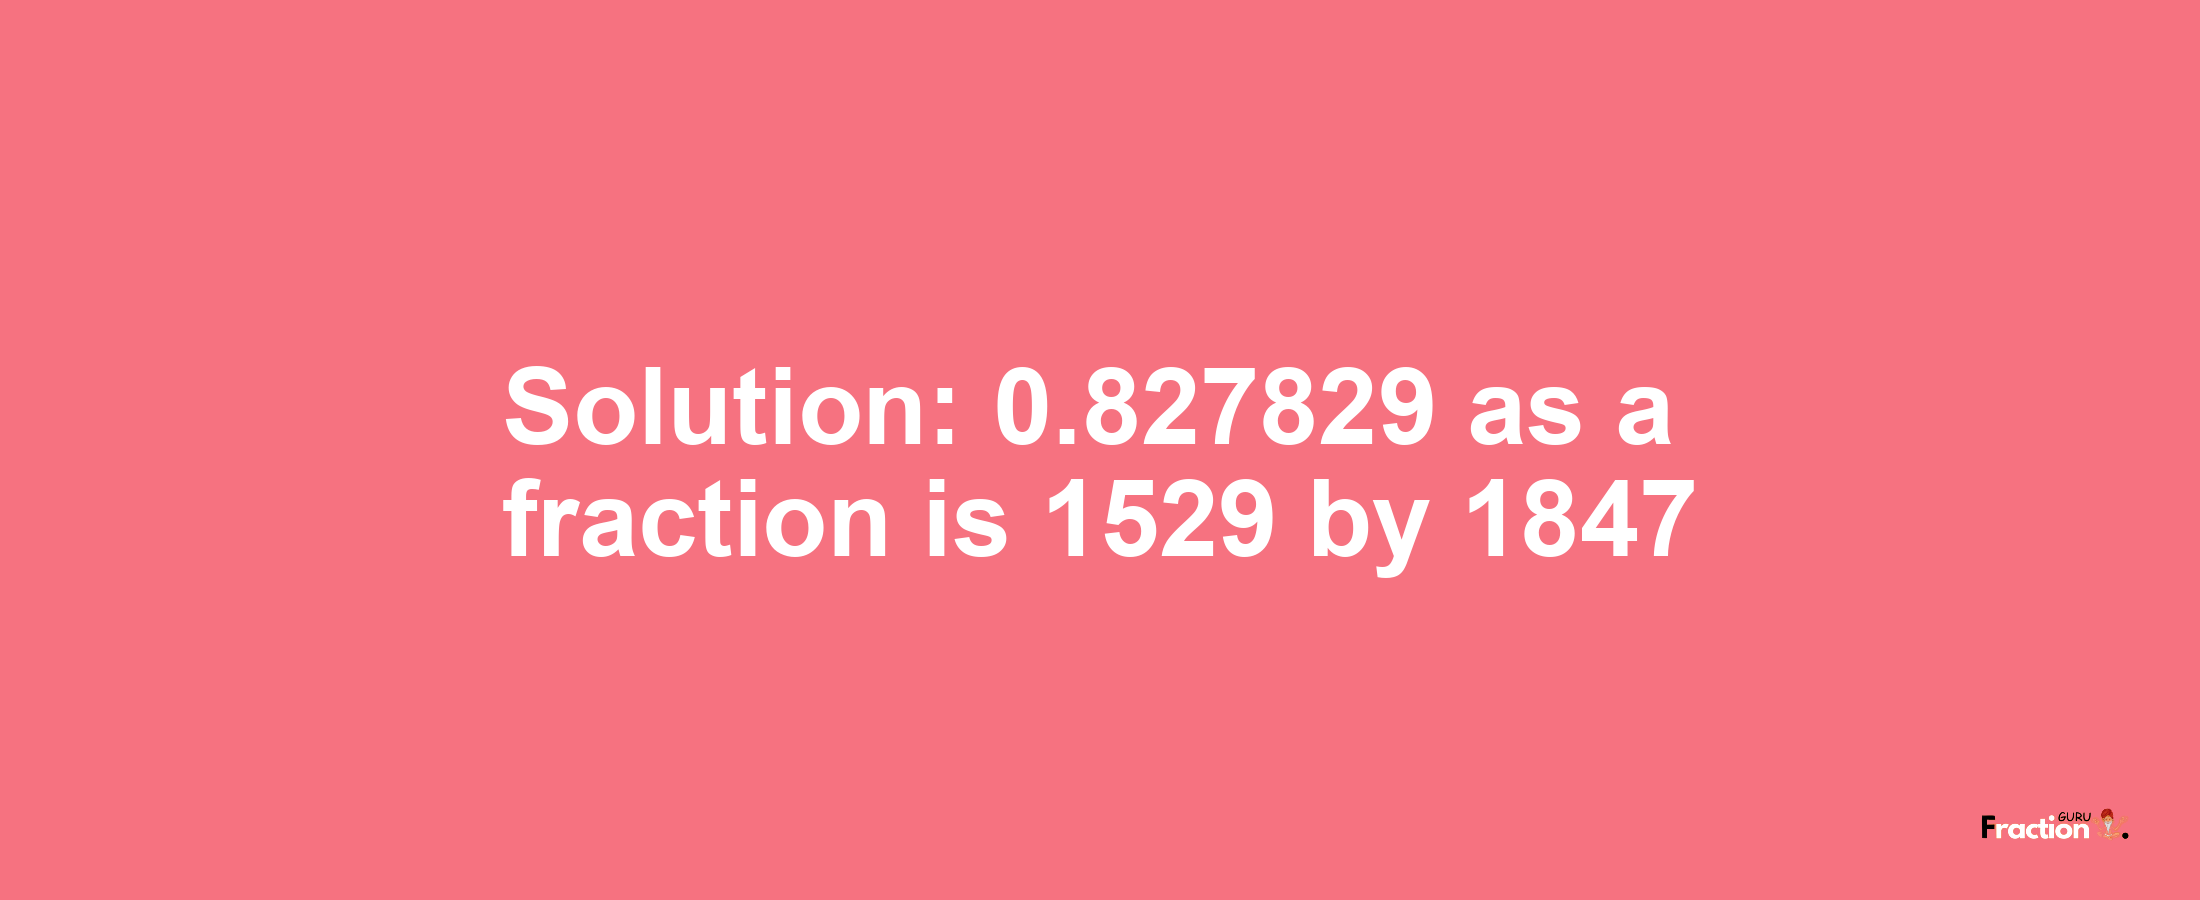 Solution:0.827829 as a fraction is 1529/1847